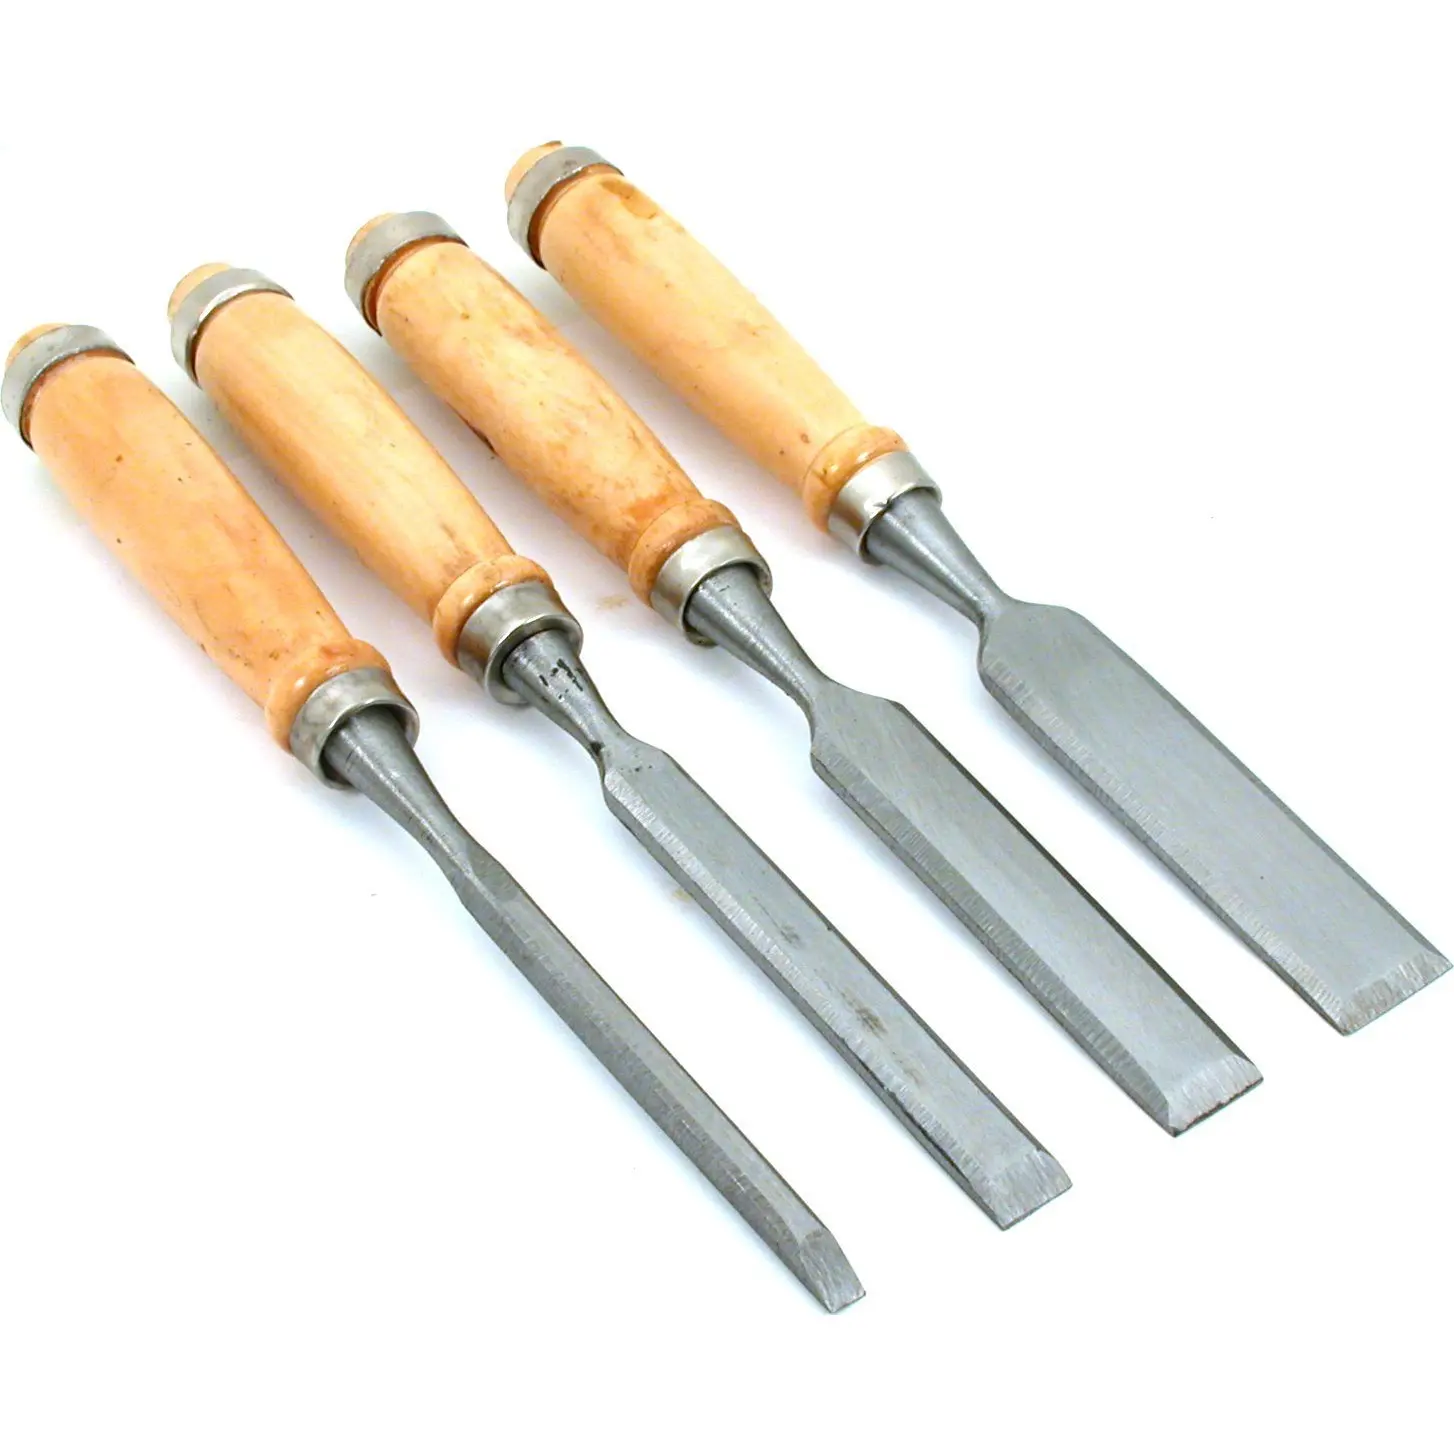 Buy 4 Wood Carving Chisels Woodworking Hobby Tools in 